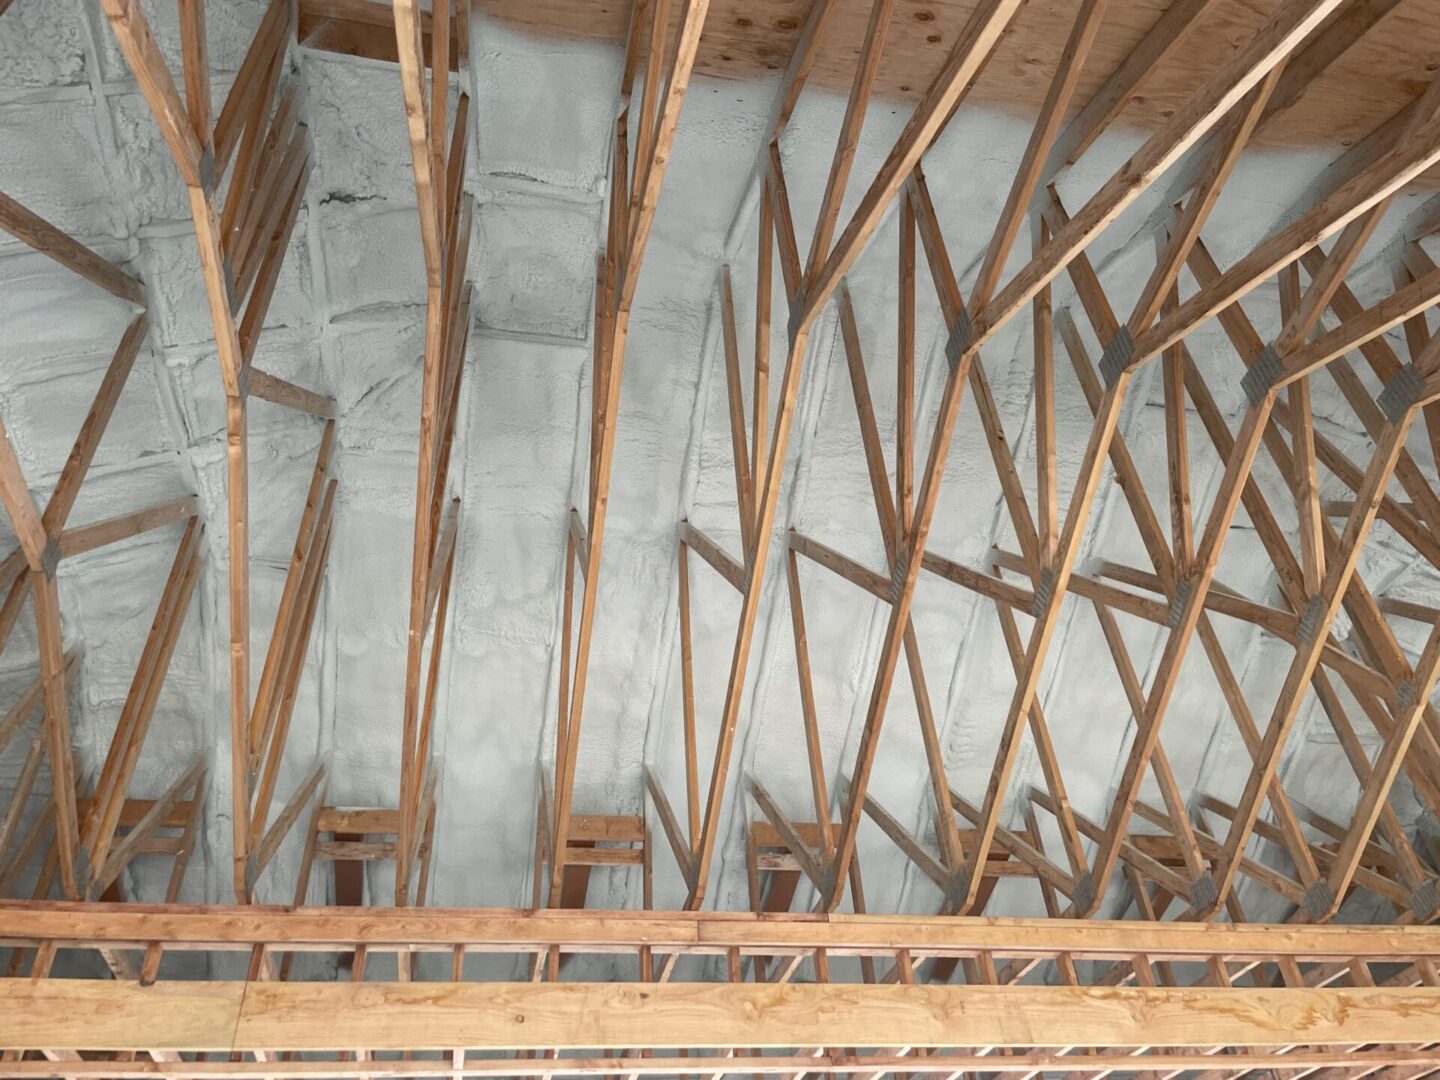 ongoing construction with wooden beams and spray on insulation on ceiling